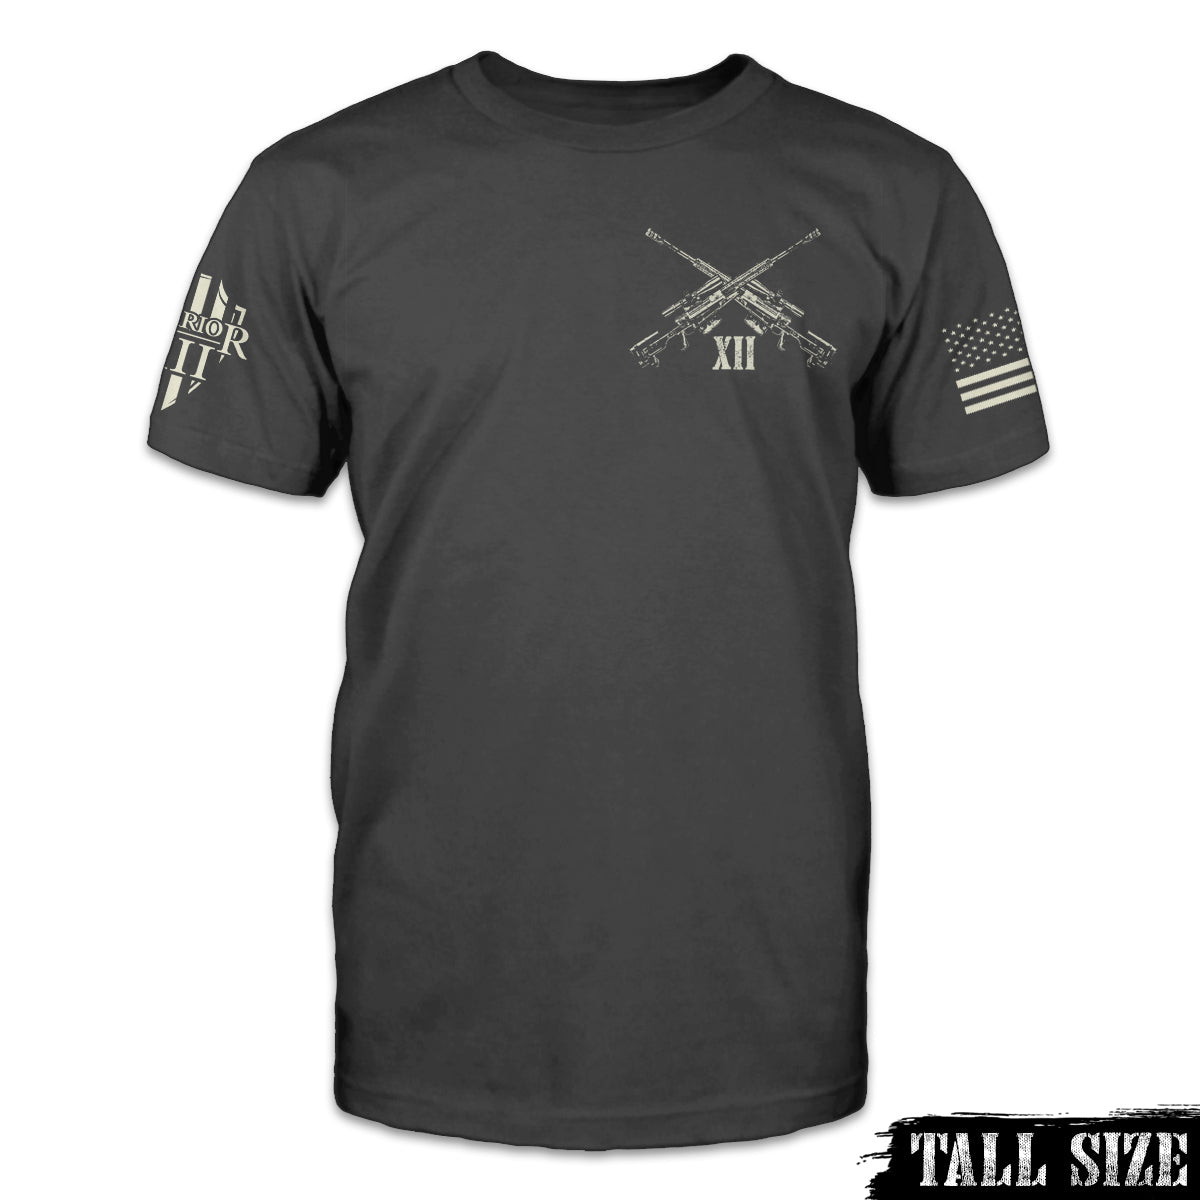 A grey tall size shirt with two guns crossed over printed on the front of the shirt.